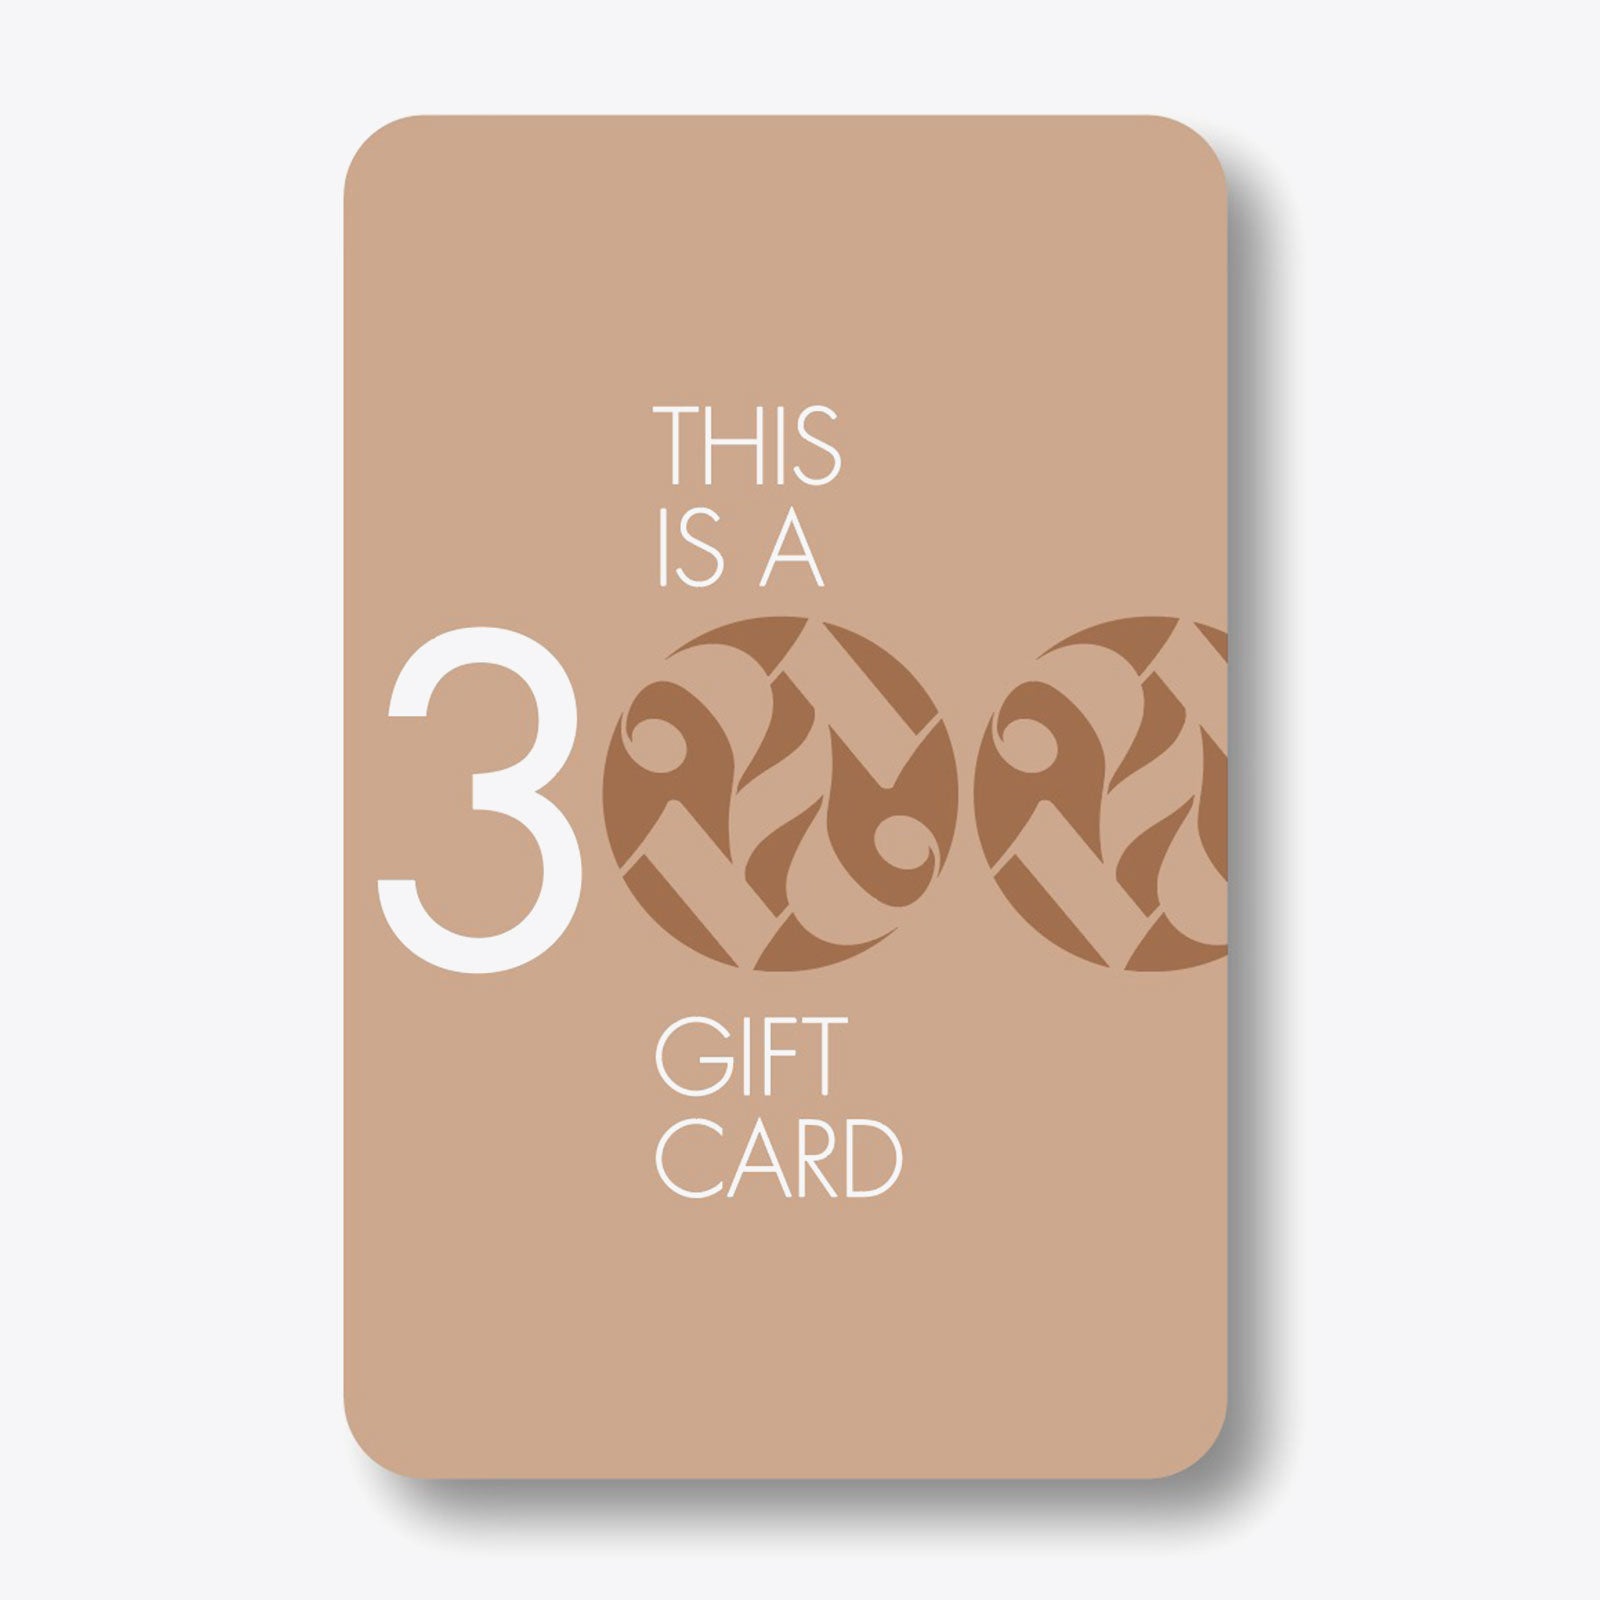 GIFT GOLD CARD